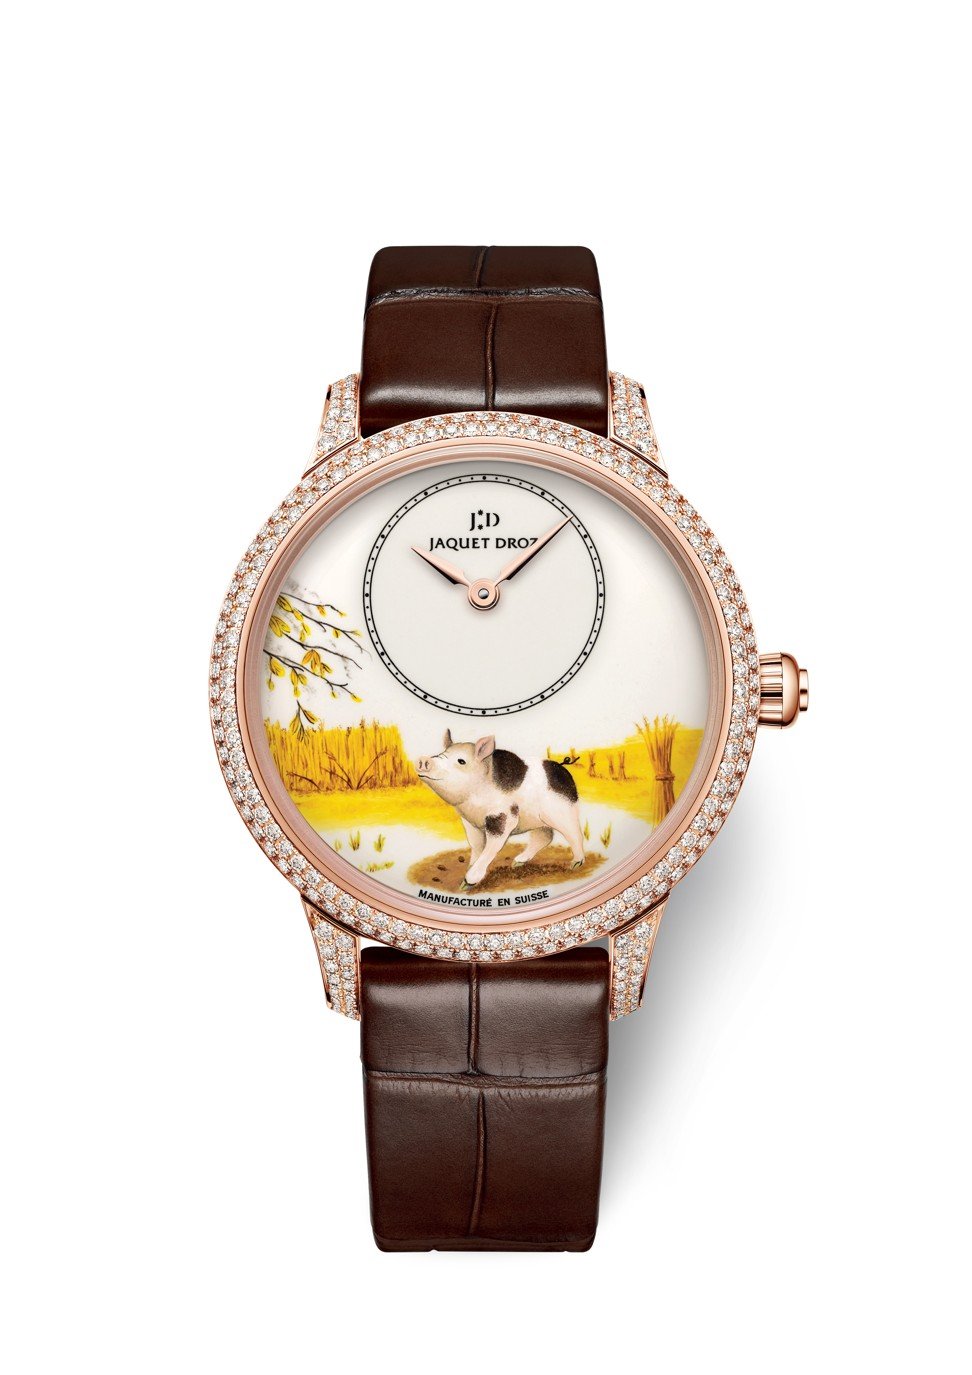 Jaquet Droz’s 35mm Petite Heure Minute Year of Pig watch includes 80 diamonds set around the bezel.